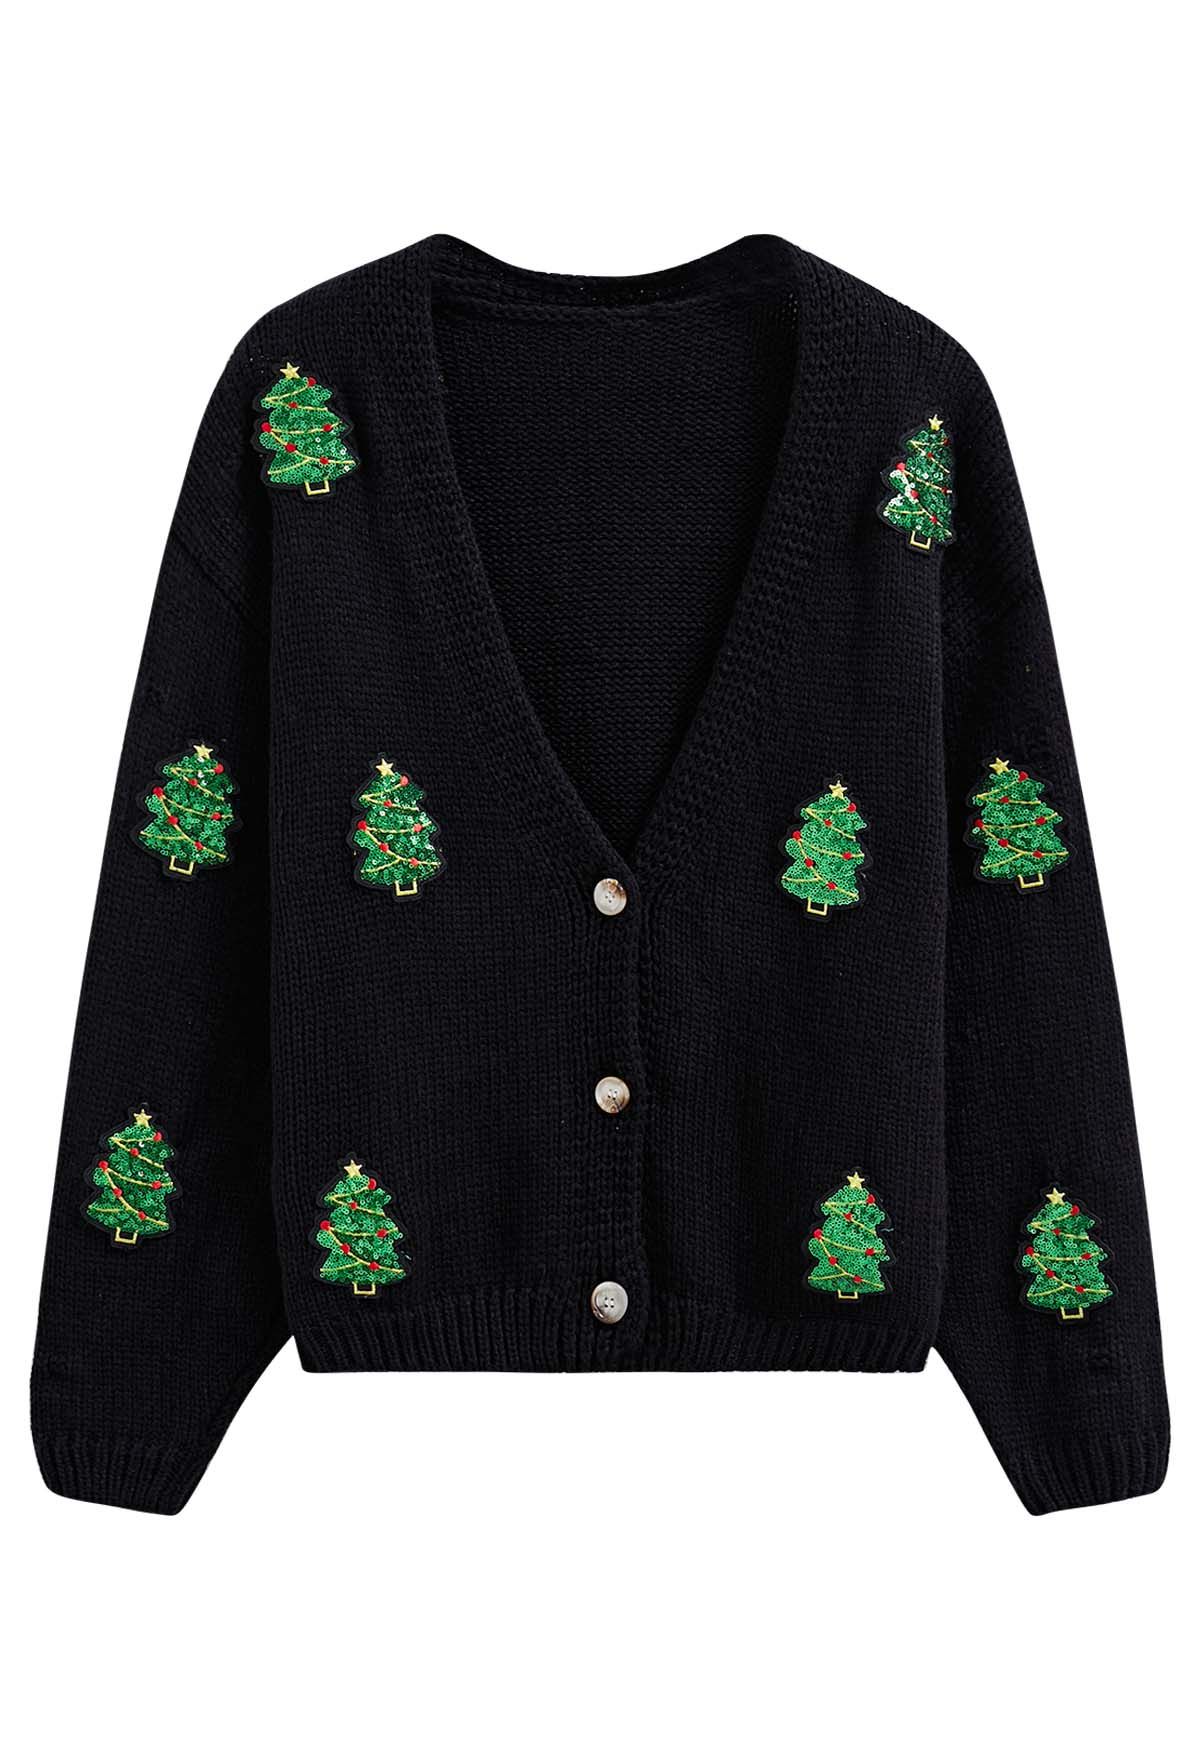 Sequin Christmas Tree Patch Button-Up Cardigan in Black